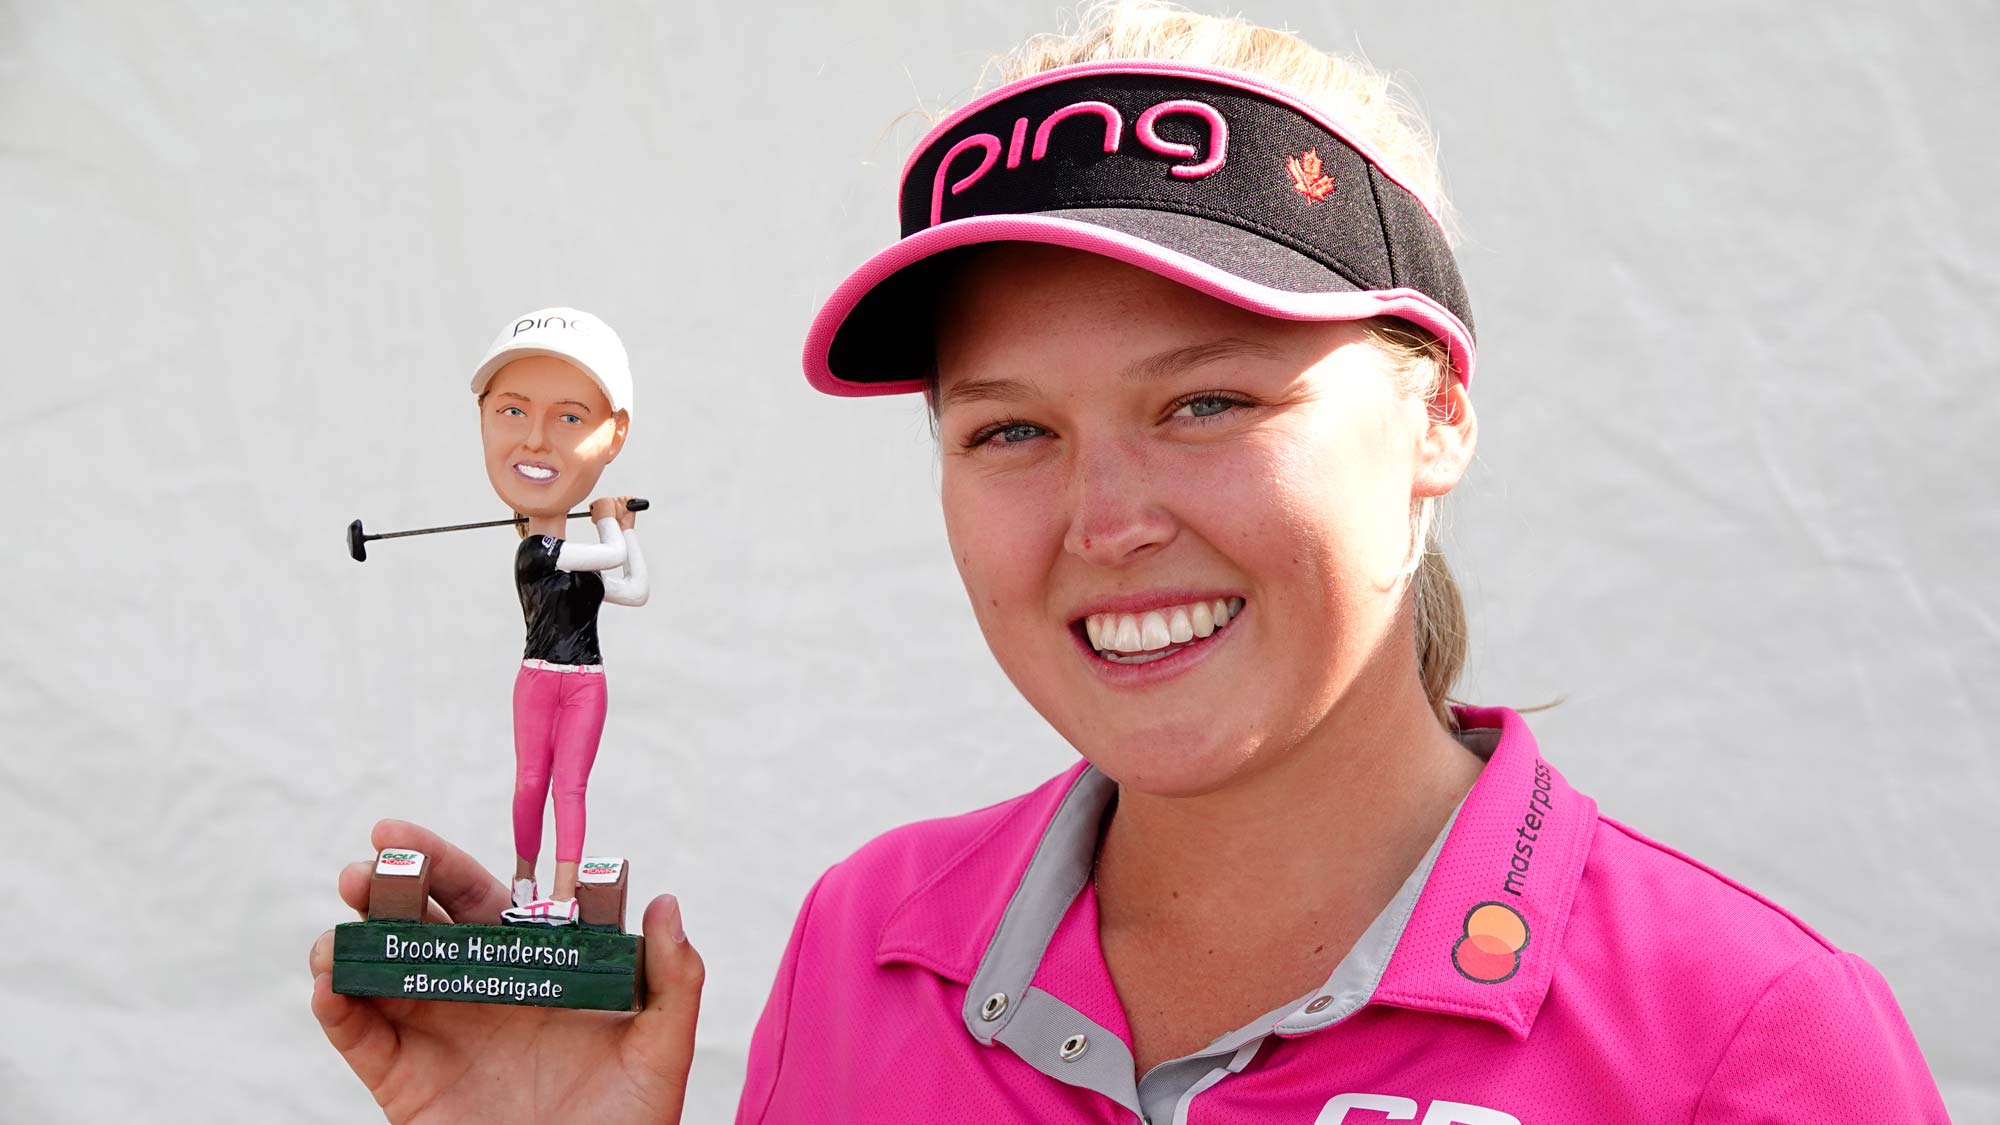 Brooke Henderson poses with her bobble head before the 2018 CP Women's Open